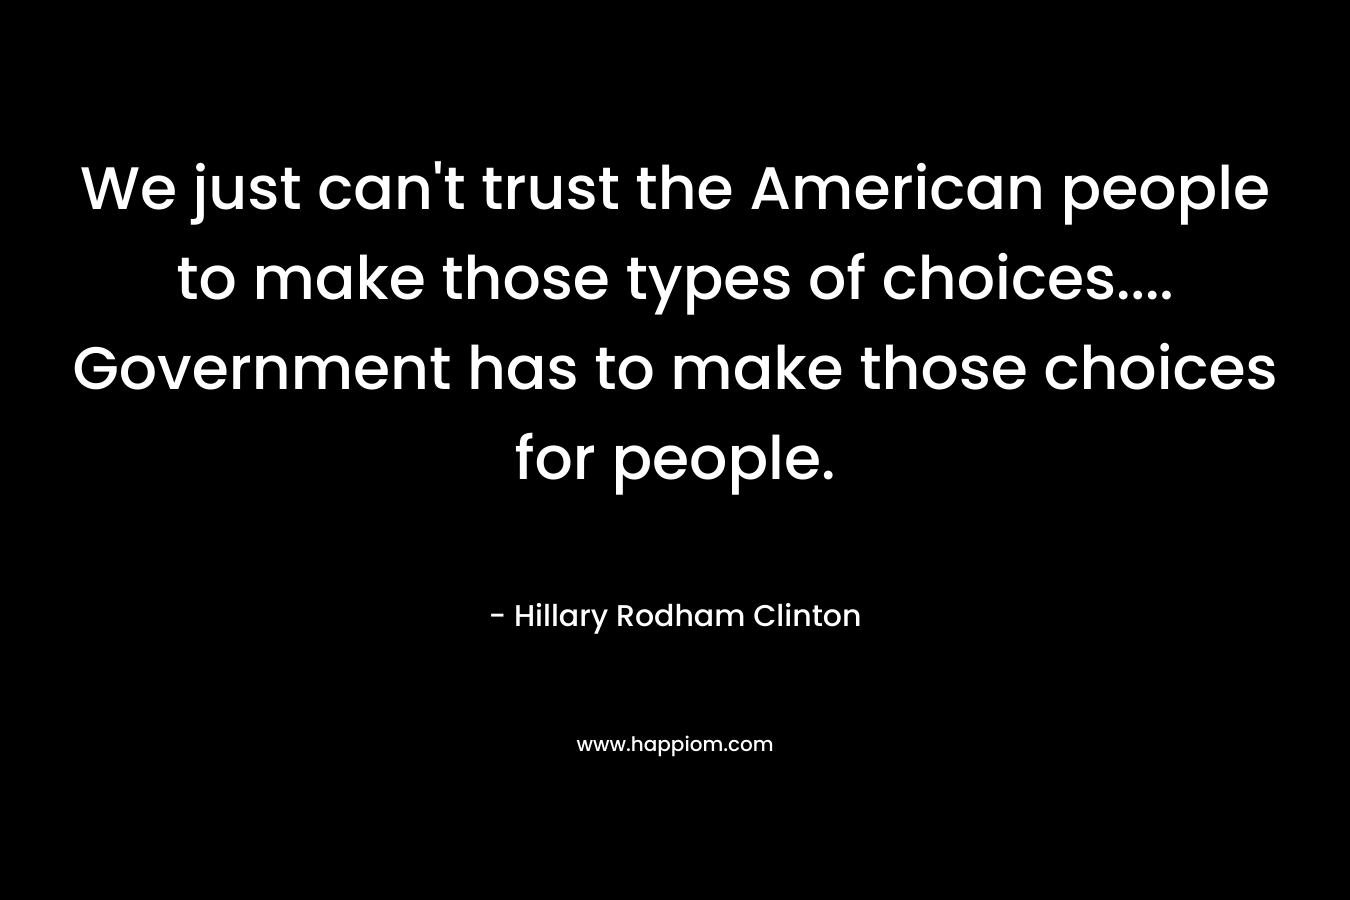 We just can't trust the American people to make those types of choices.... Government has to make those choices for people.